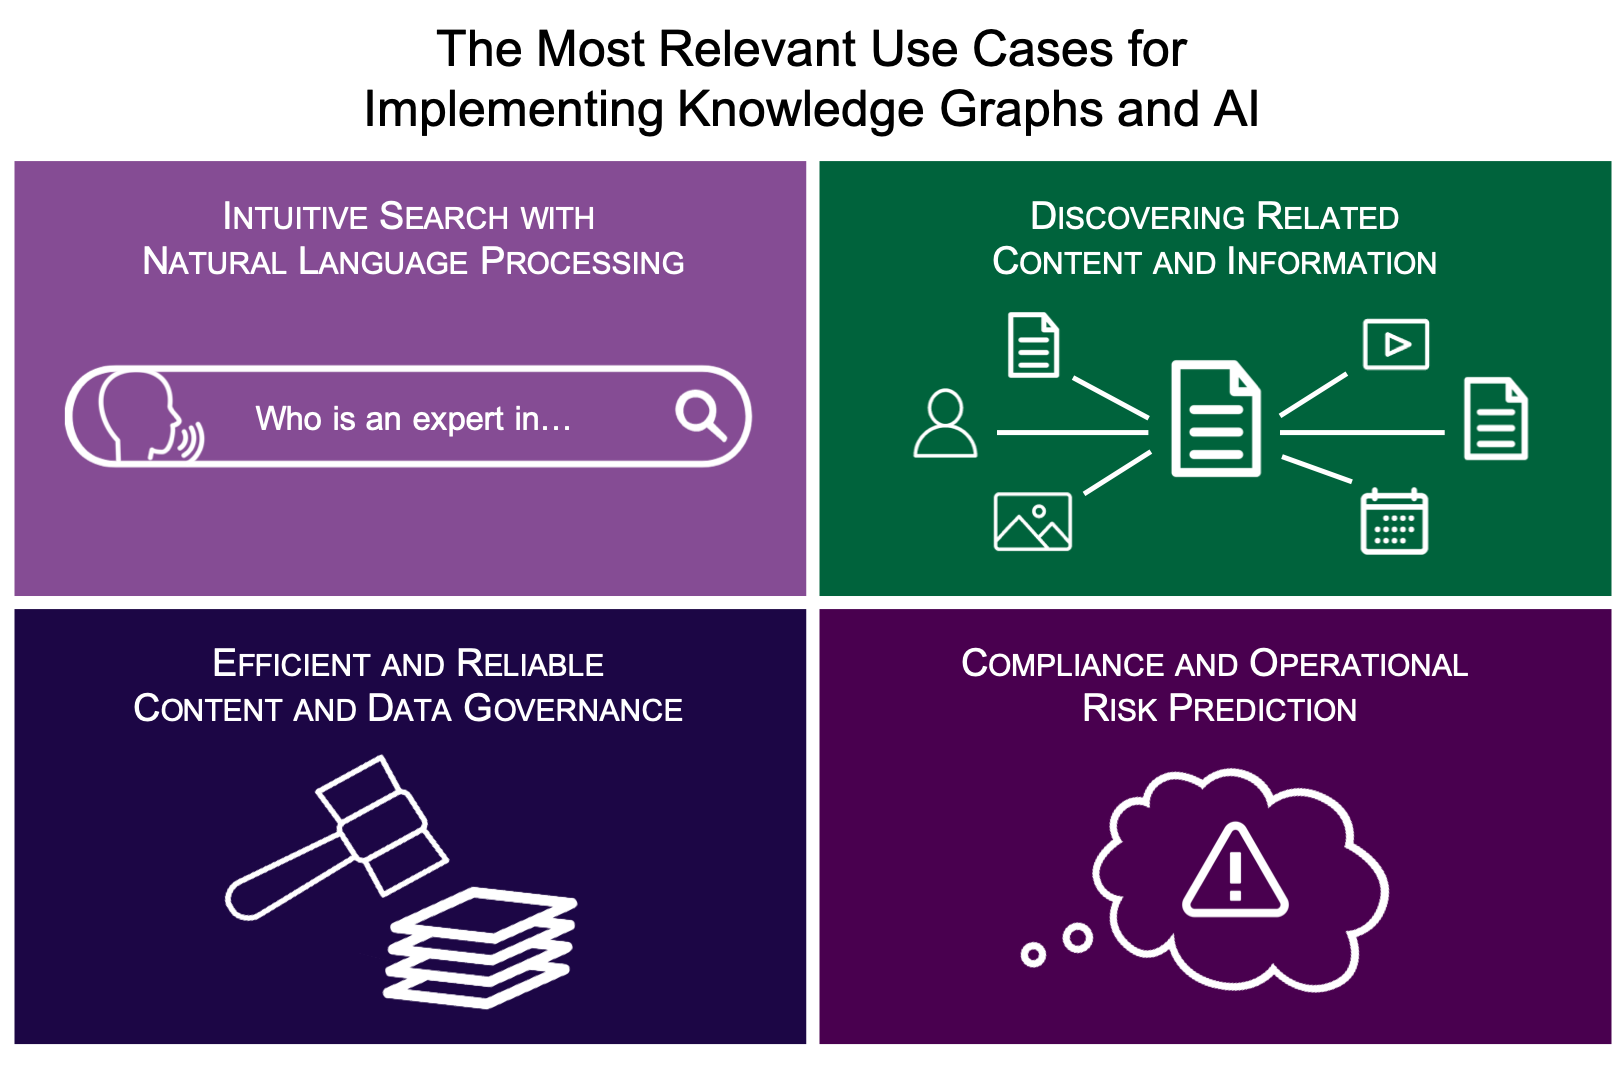 Relevant Use Cases for Knowledge Graphs and AI